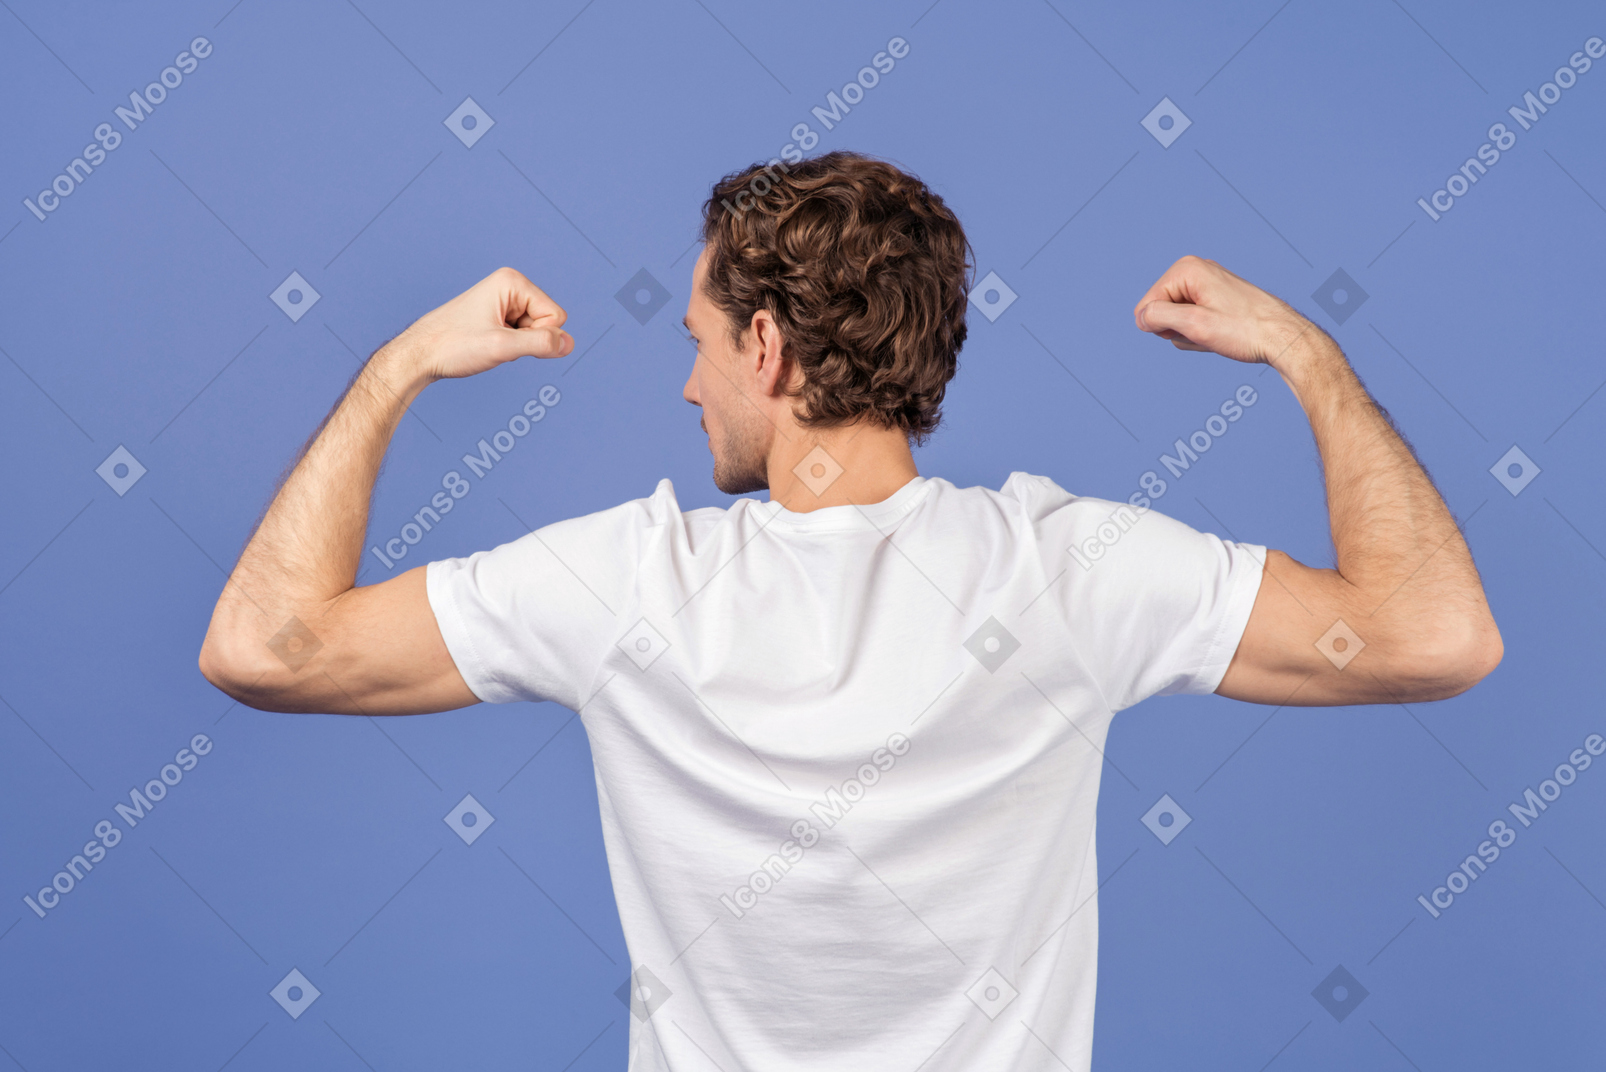 Young man showing his muscles